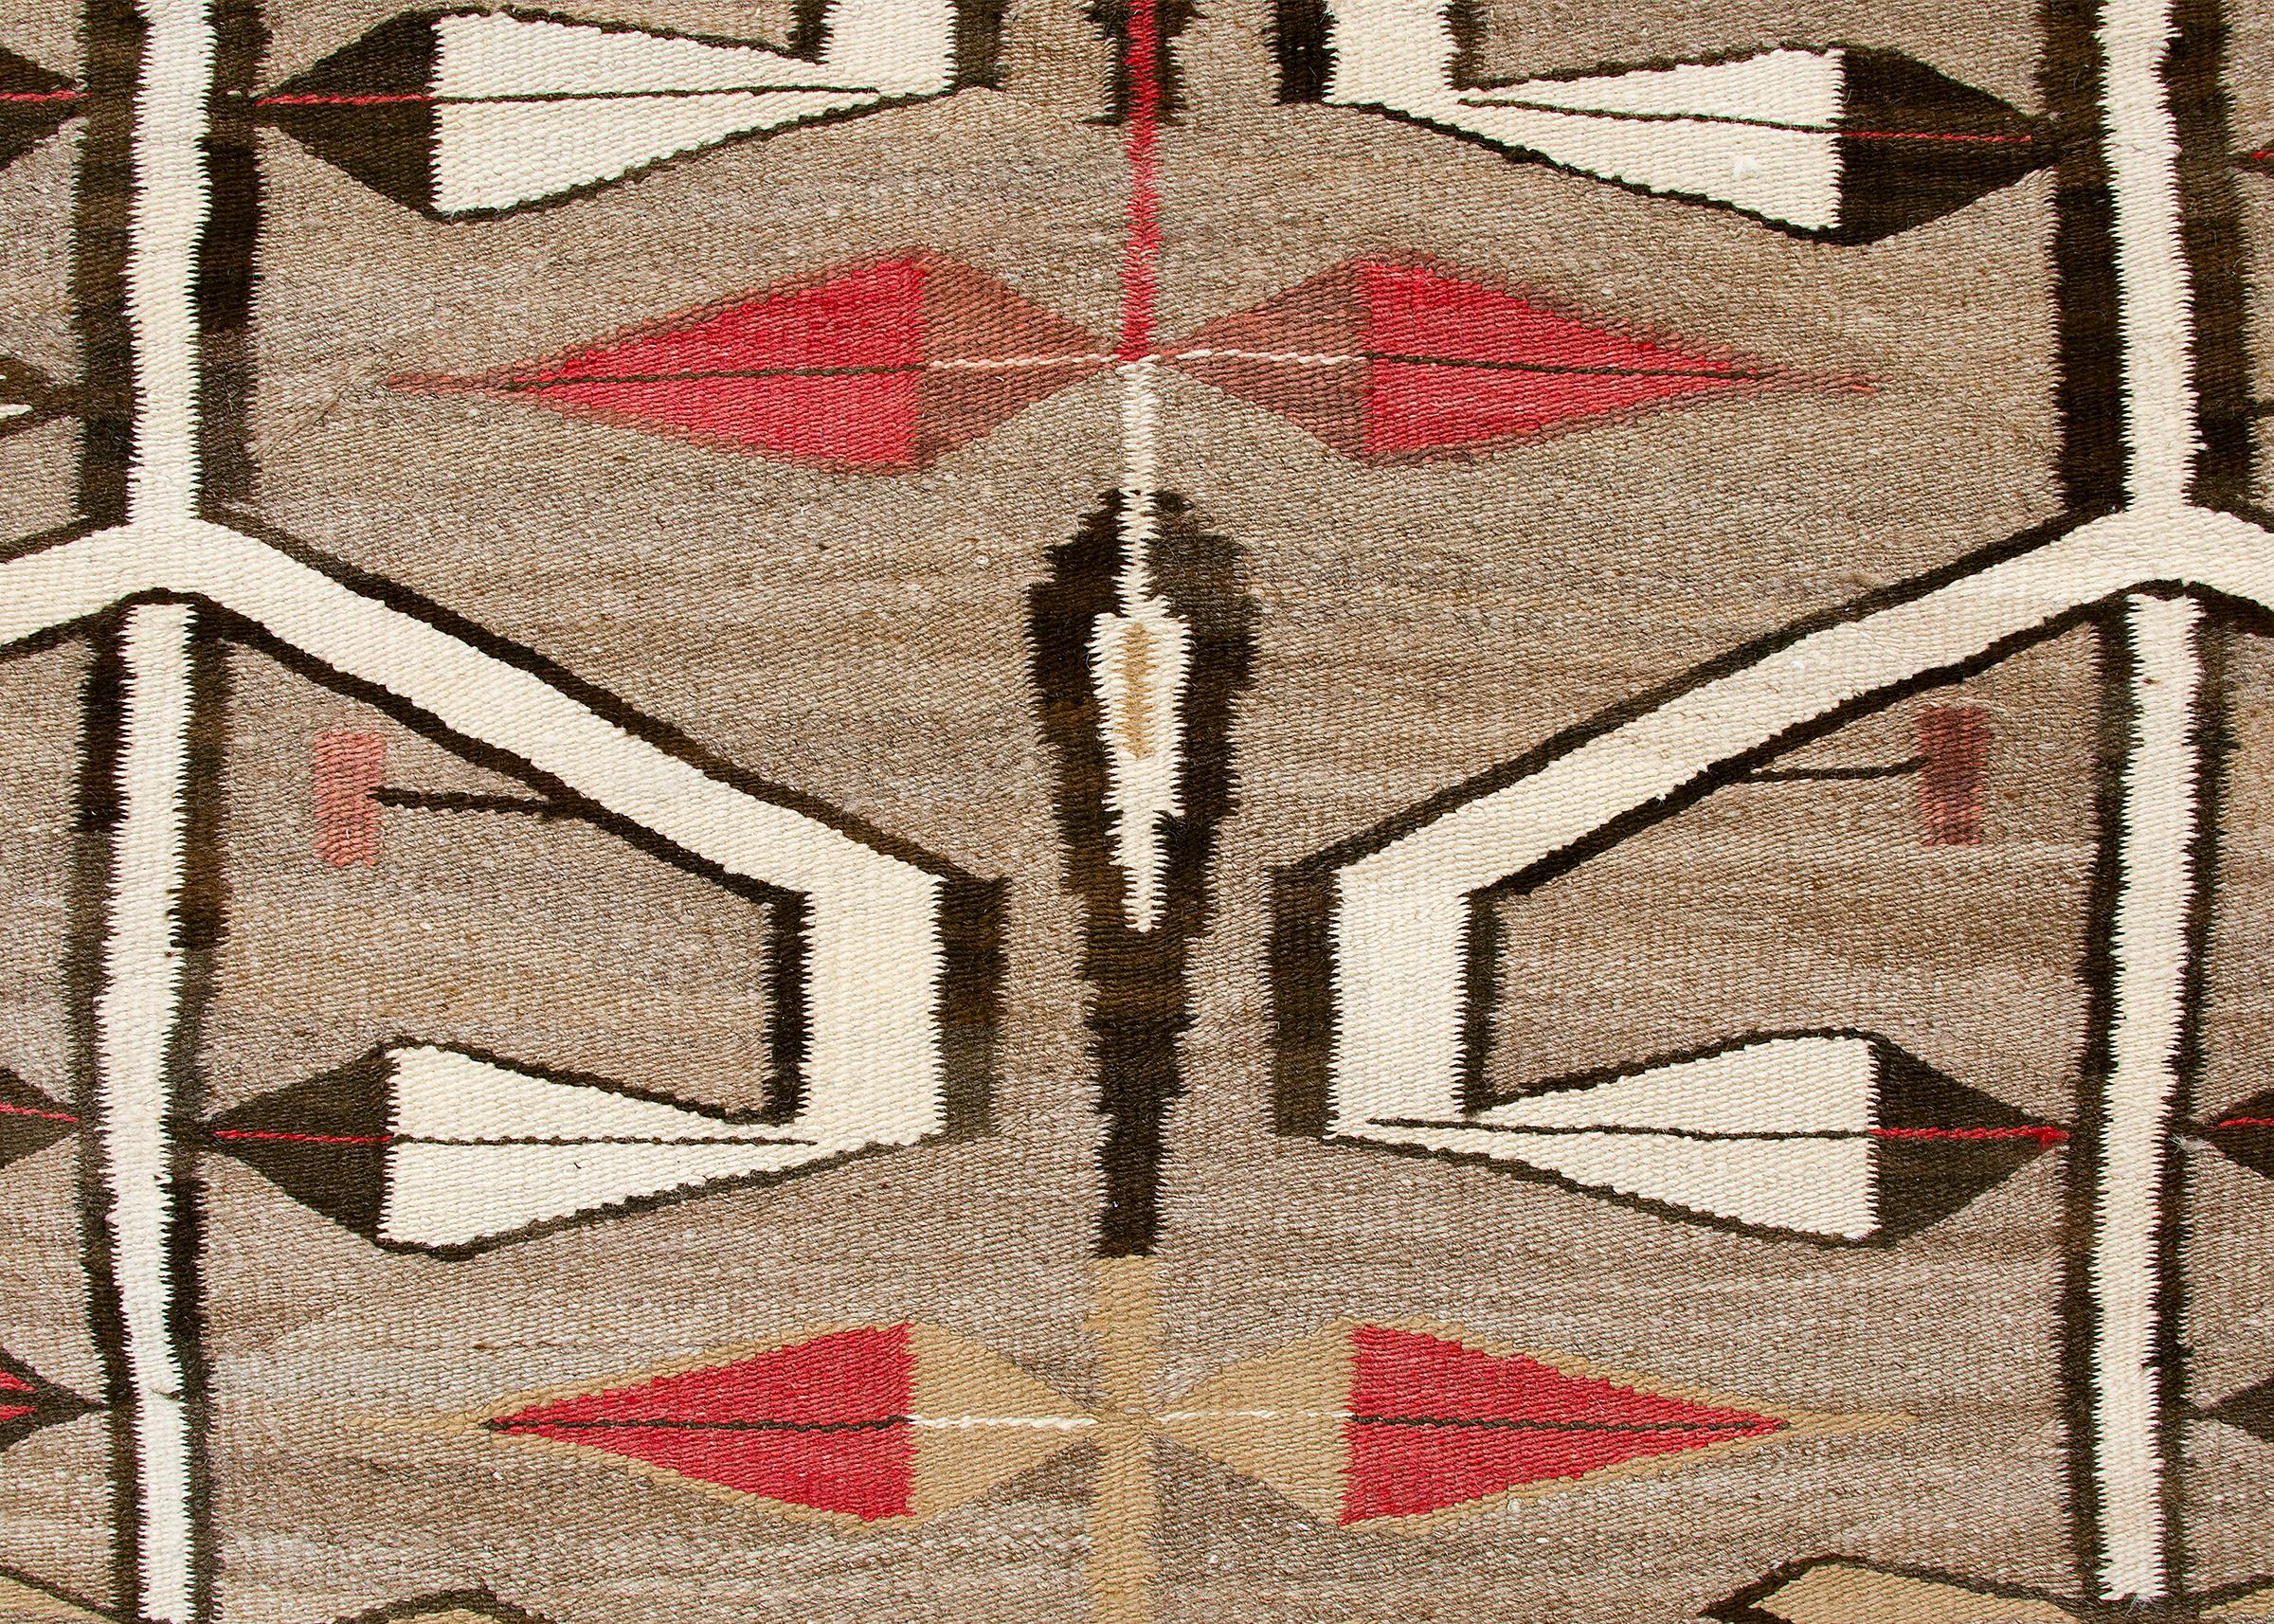 Native American Vintage Navajo Rug Crystal Trading Post circa 1930 Pictorial Feathers and Arrows